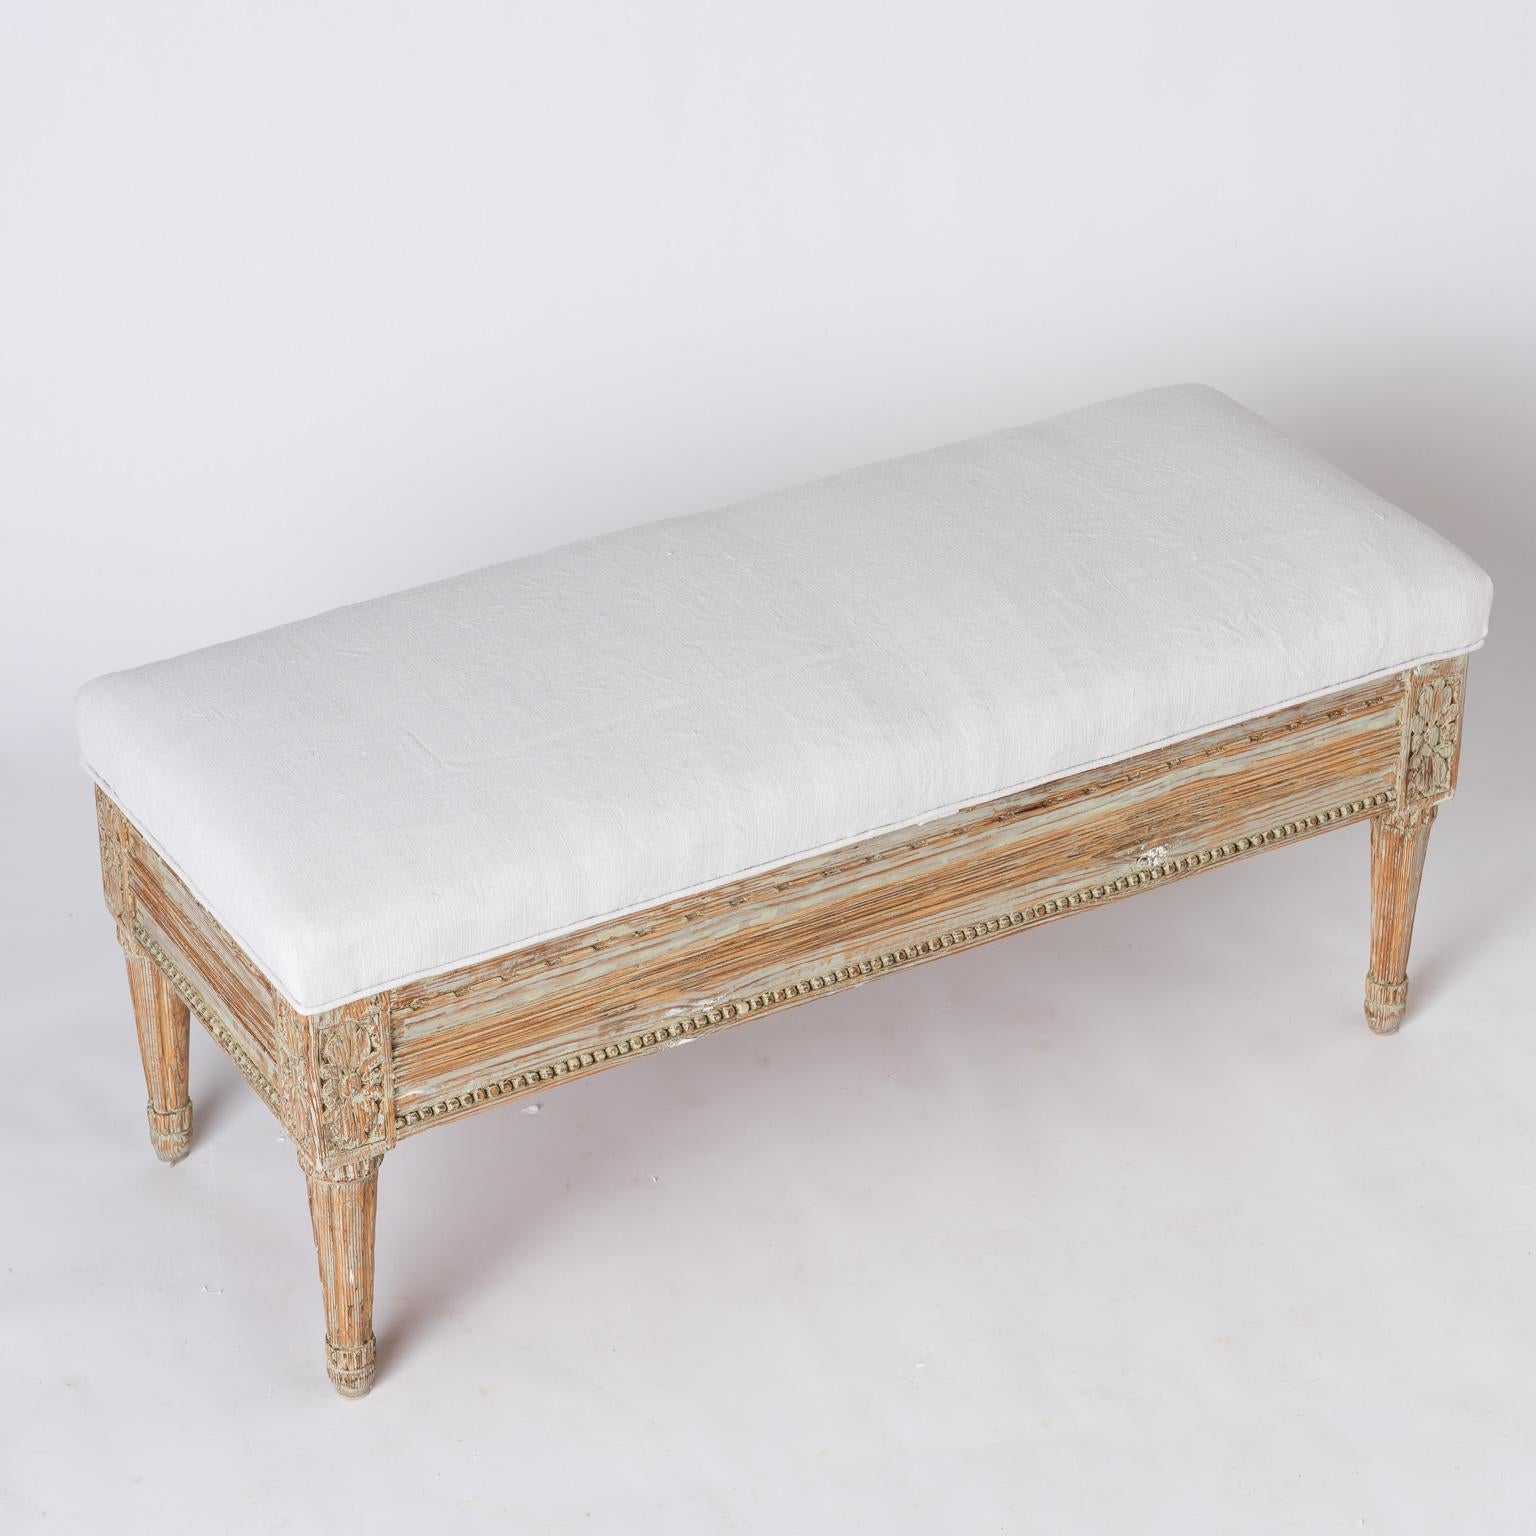 This useful and charming bench has detailed carvings with flowers on the front sides, and nicely tapered legs. The top opens to reveal plenty of storage, and beautiful old iron hinges. The paint surface is original. This piece could also be used as